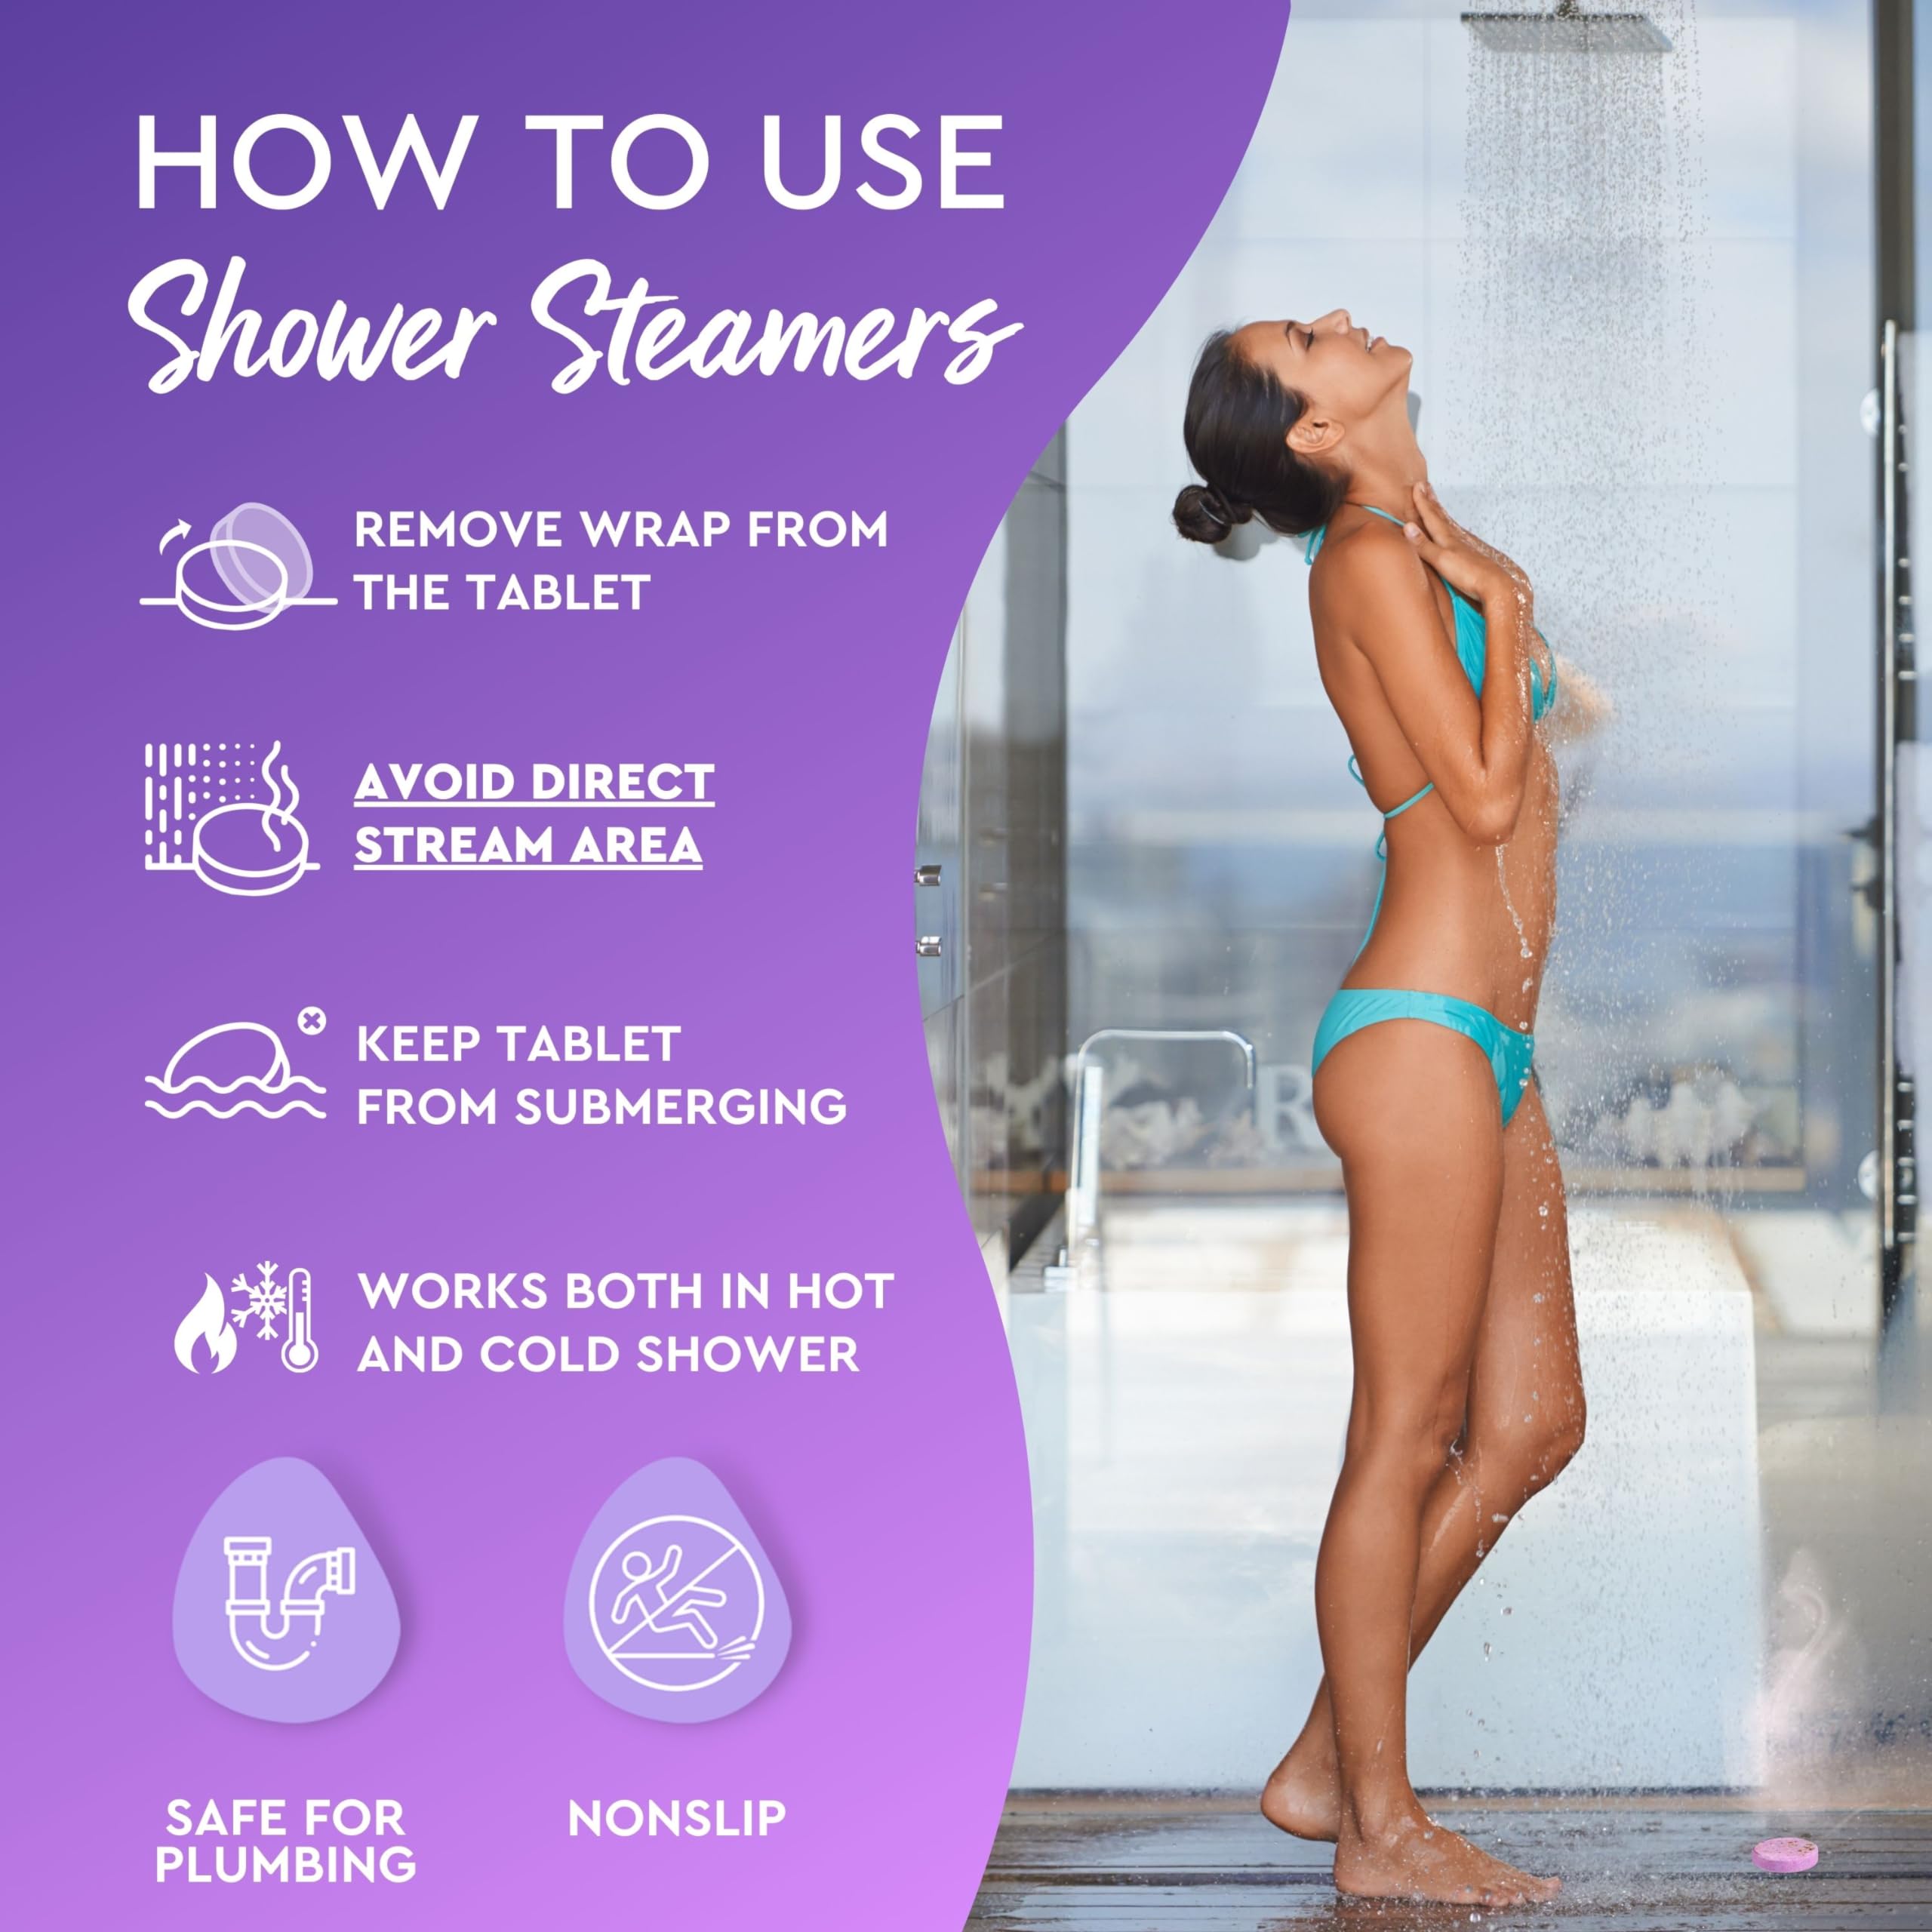 Cleverfy Shower Steamers Aromatherapy - Mothers Day Gifts for Mom from Daughter. Self Care Variety Pack of 6 Shower Bombs with Essential Oils. Purple Set